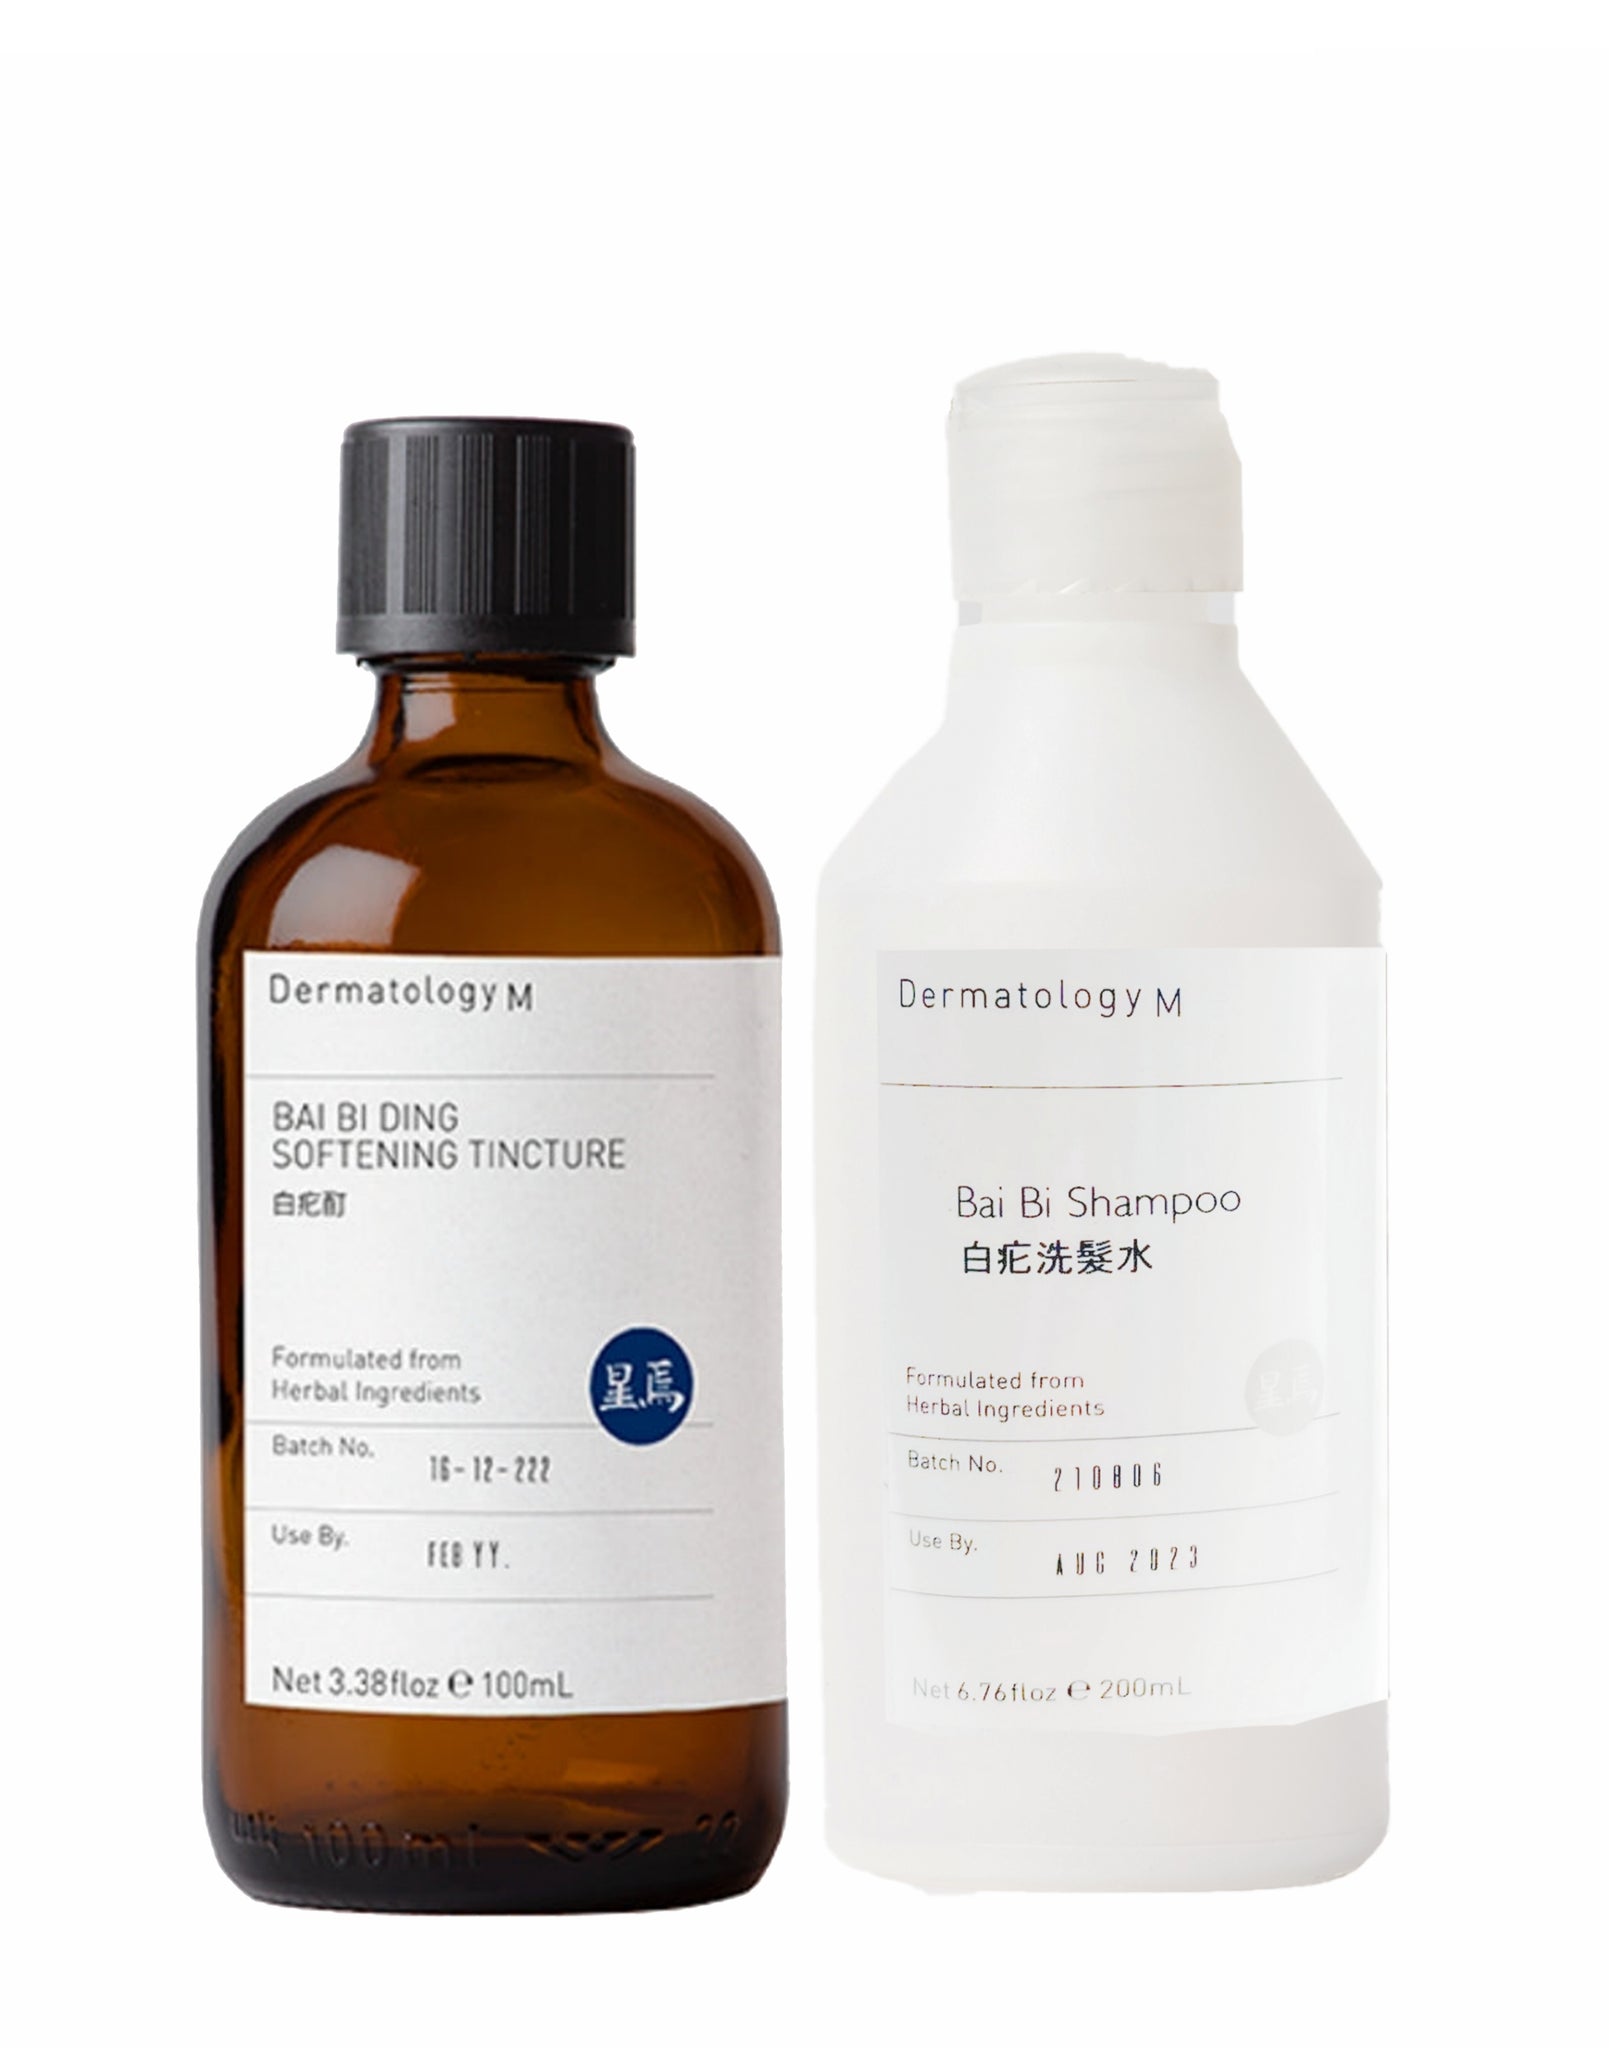 Dermoplacen (Shampoo Piloactive with Placenta) for Scalp Psoriasis and  Alopecia Treatment